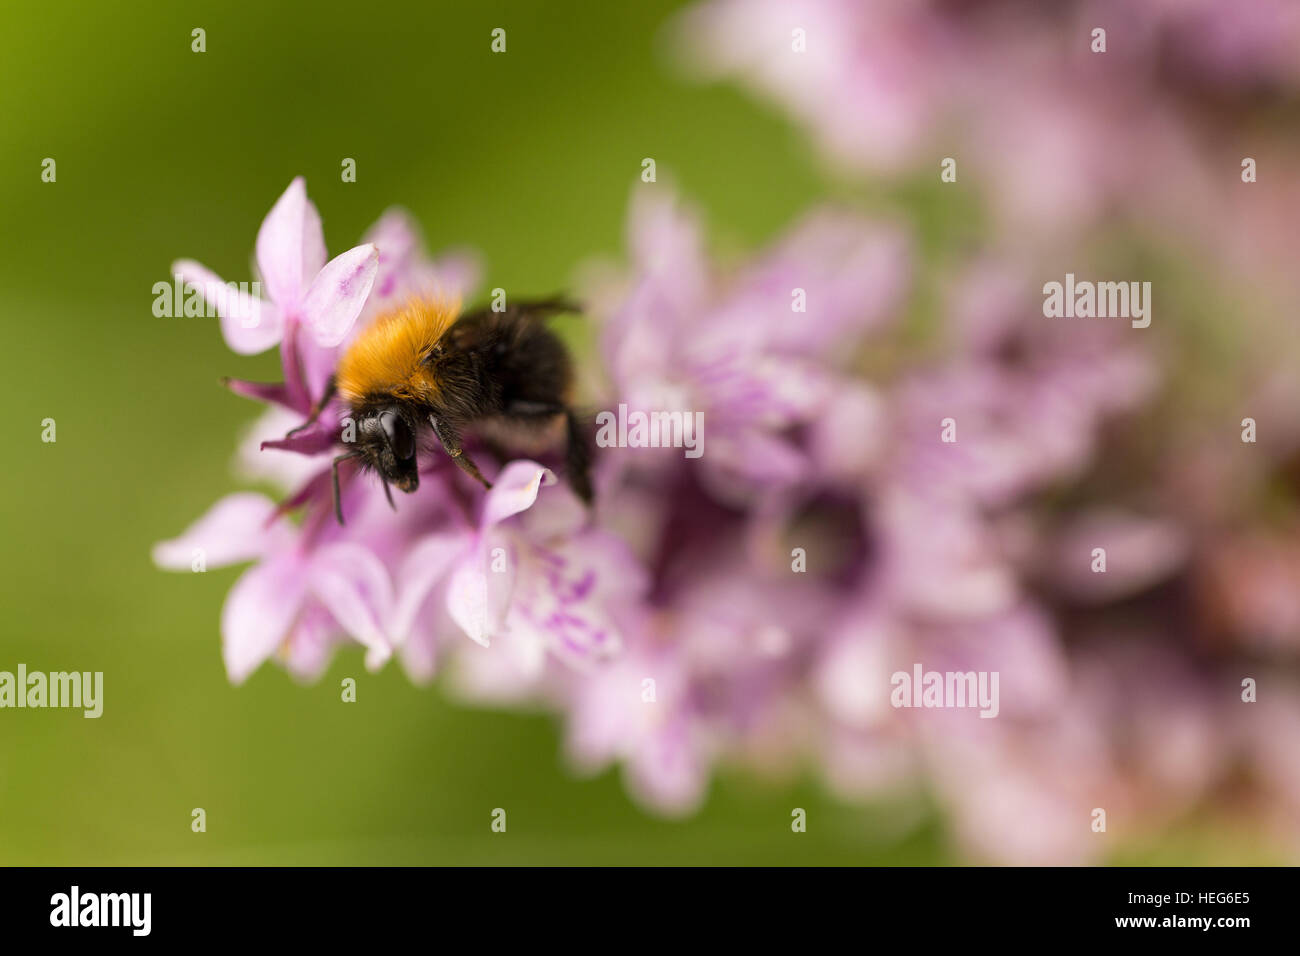 animal,background,black,bloom,bug,bumble,bumble-bee,bumblebee,busy,buzz,closeup,color,colorful,face,flower,fly,forest,green,hairy,honey,insect,isolated,macro,orange,orchid,pink,plant,summer,wasp,wild,wild orchid,worker,yellow Stock Photo